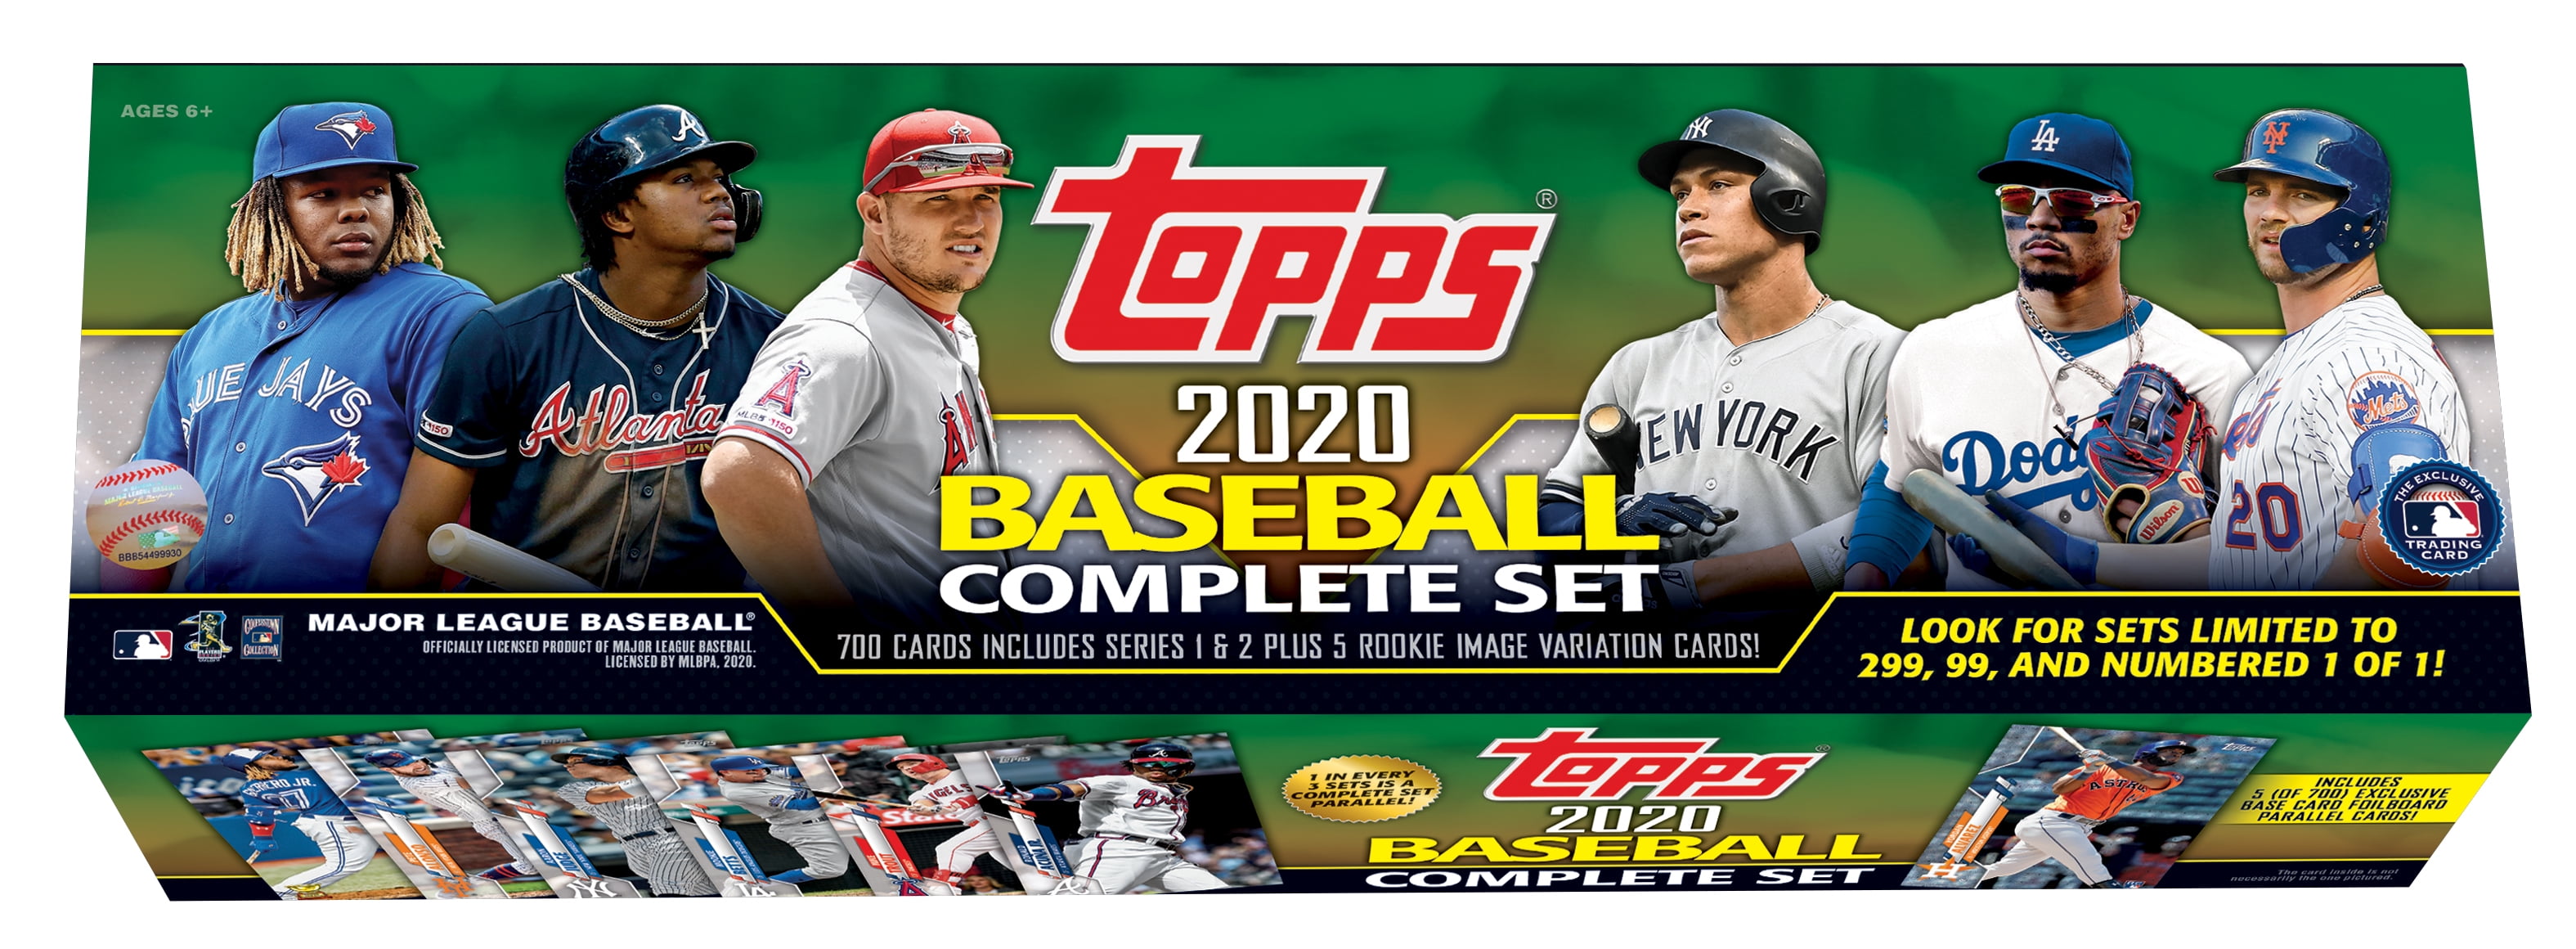 Finish Your Set 2016 Topps Update Mega Box Chrome Card You Pick the Player 